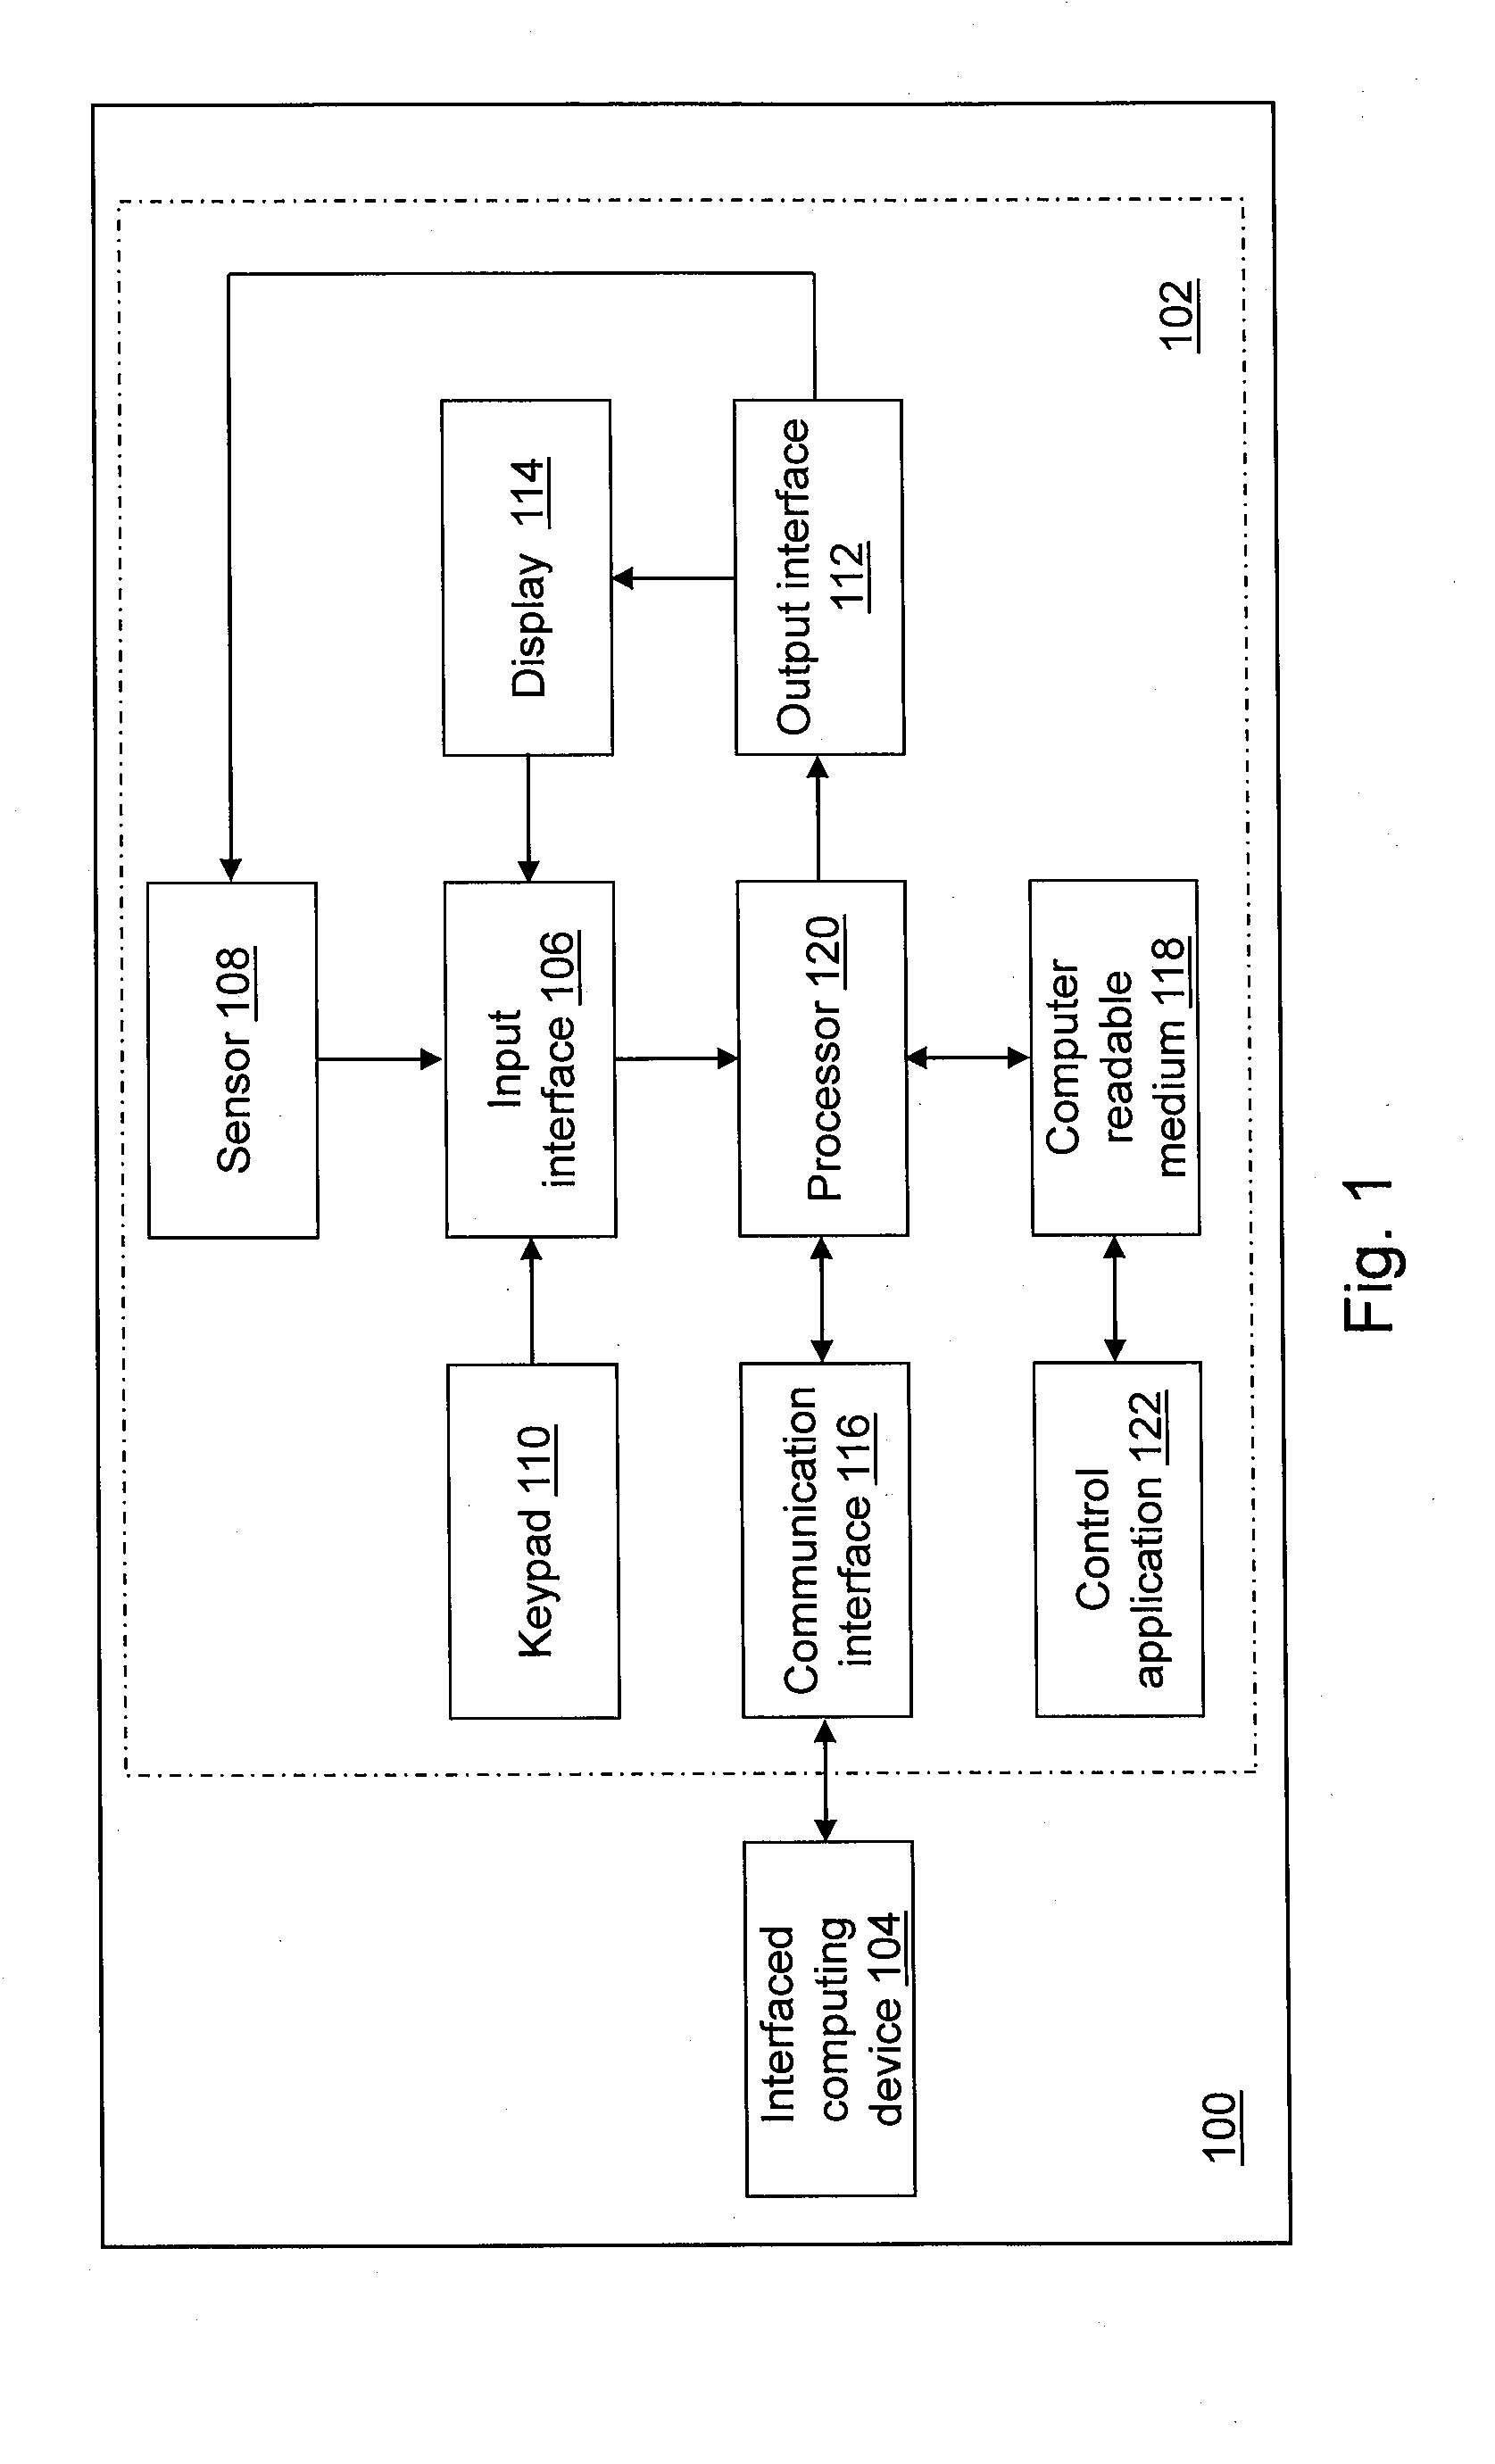 Optical Spectrometer with Underfilled Fiber Optic Sample Interface